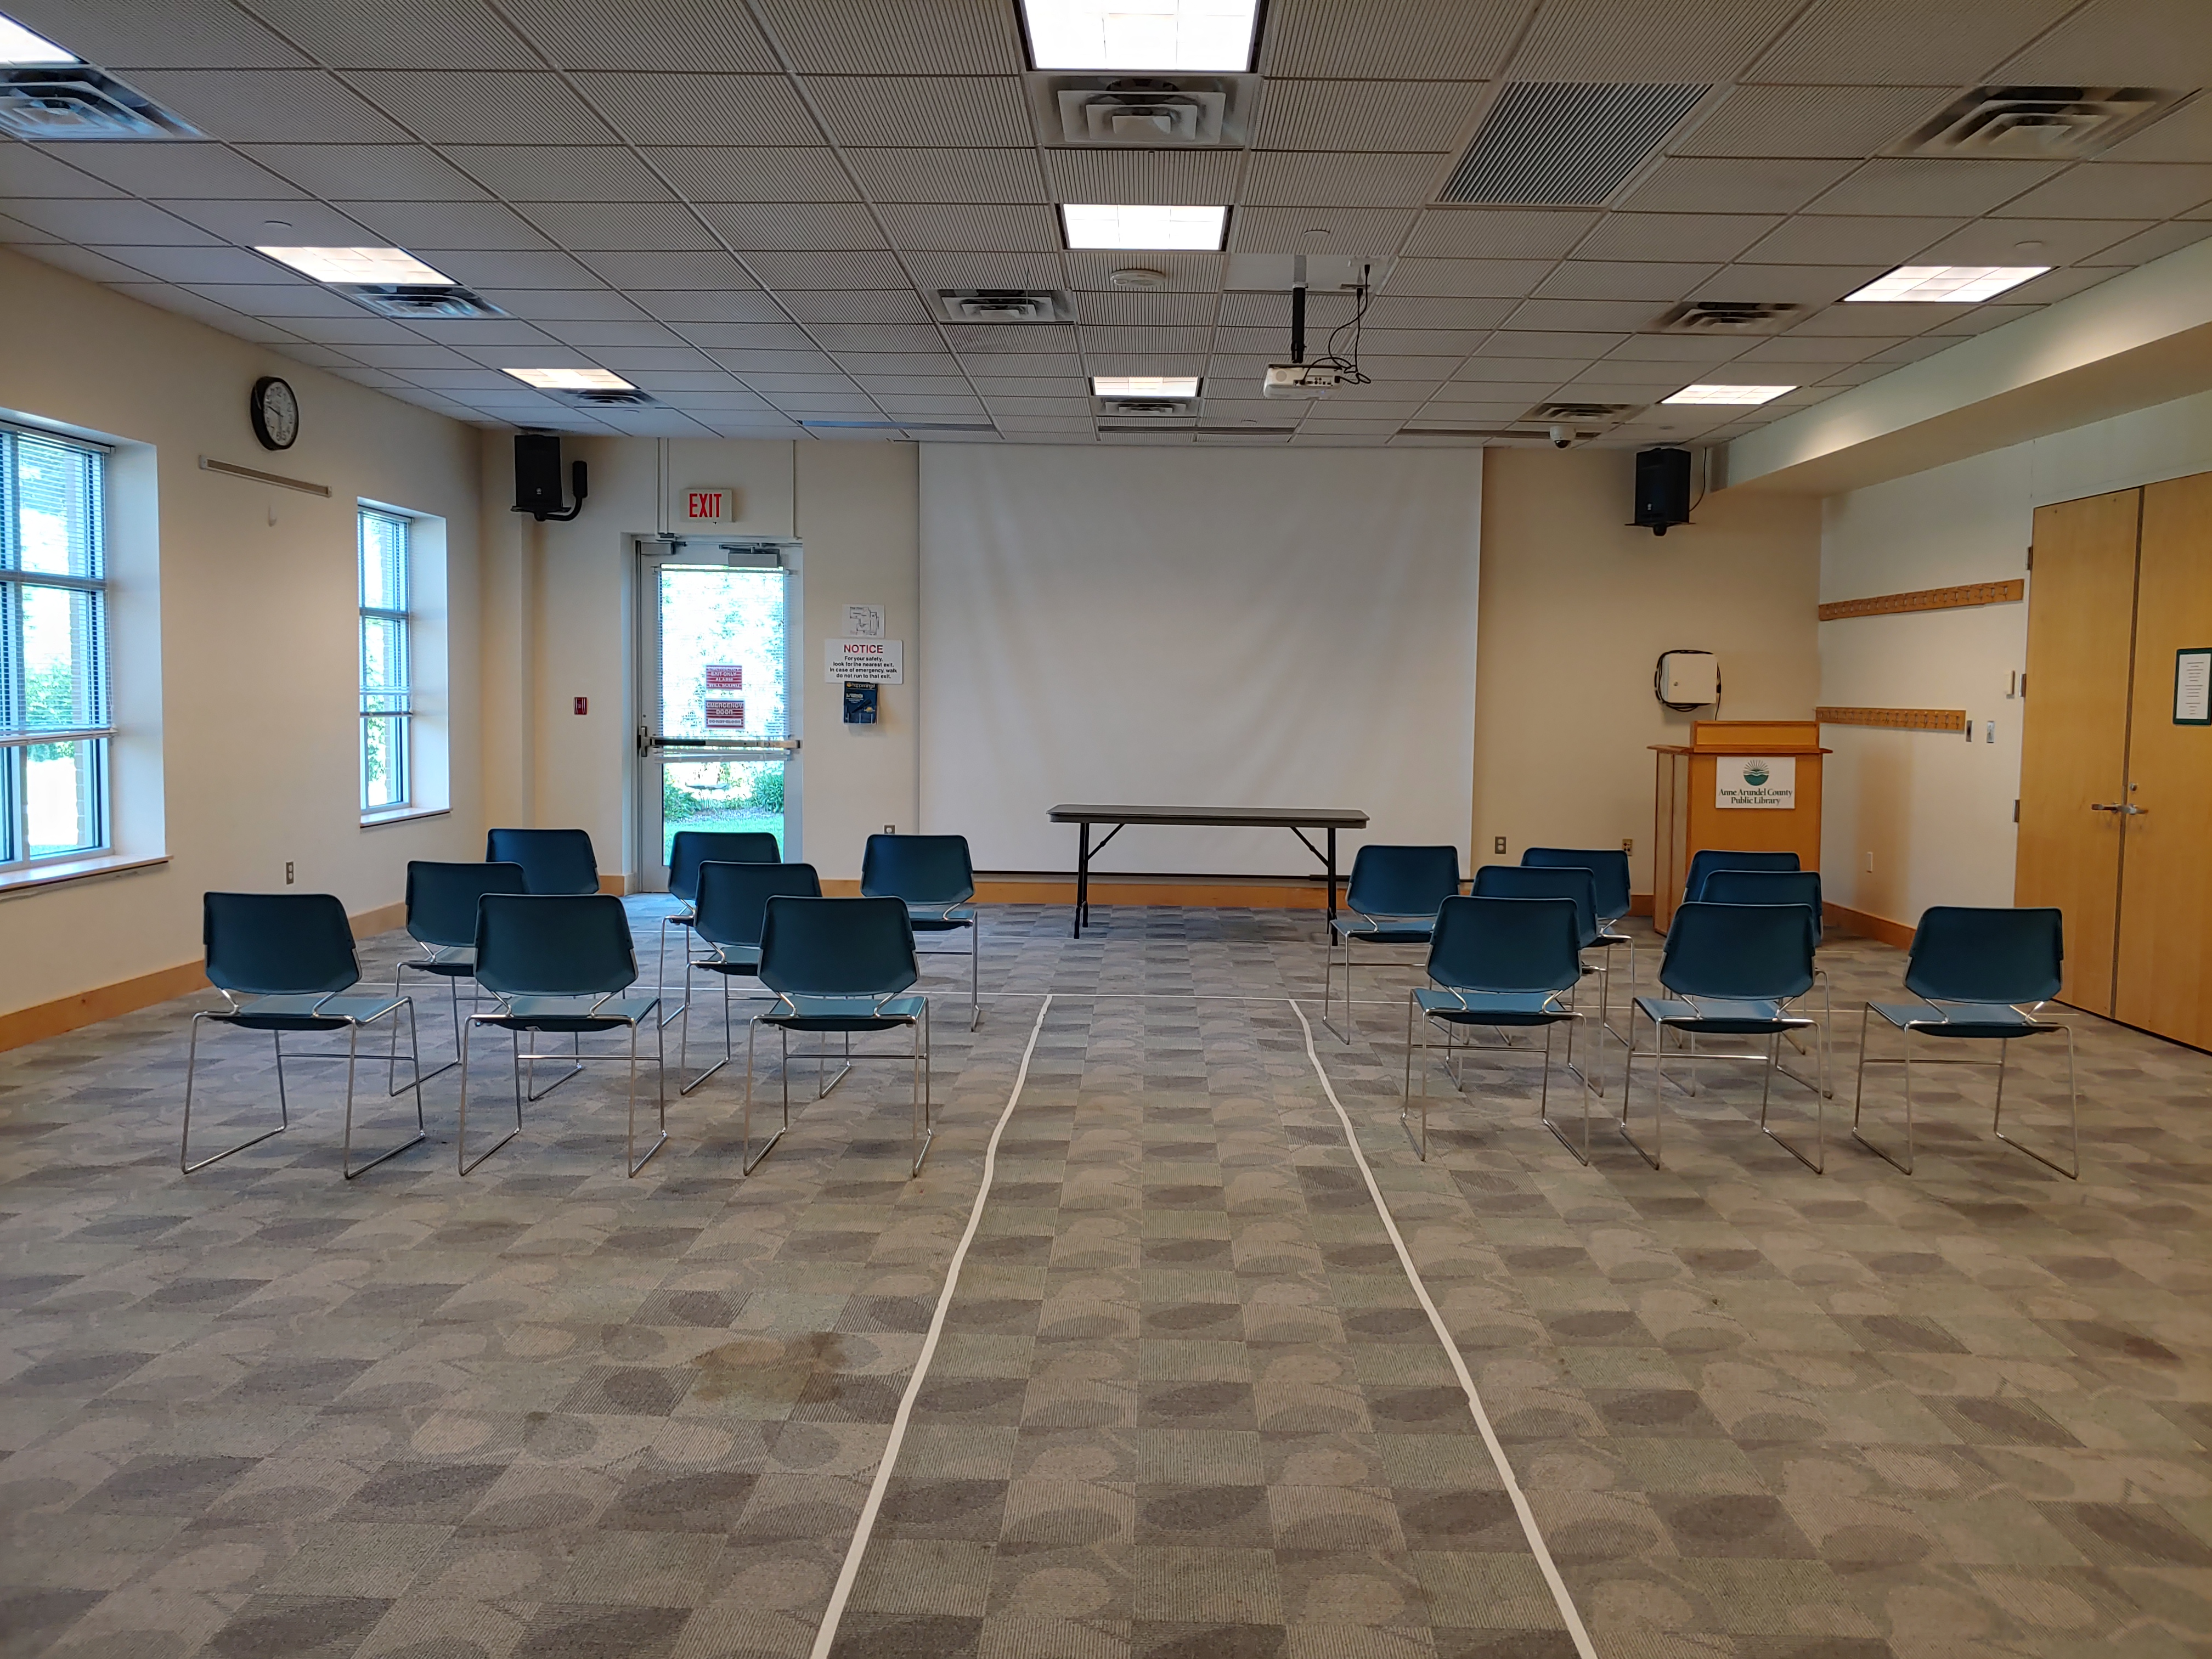 Odenton Community Meeting Room A with auditorium-style seating, central aisle, and projector with projection screen